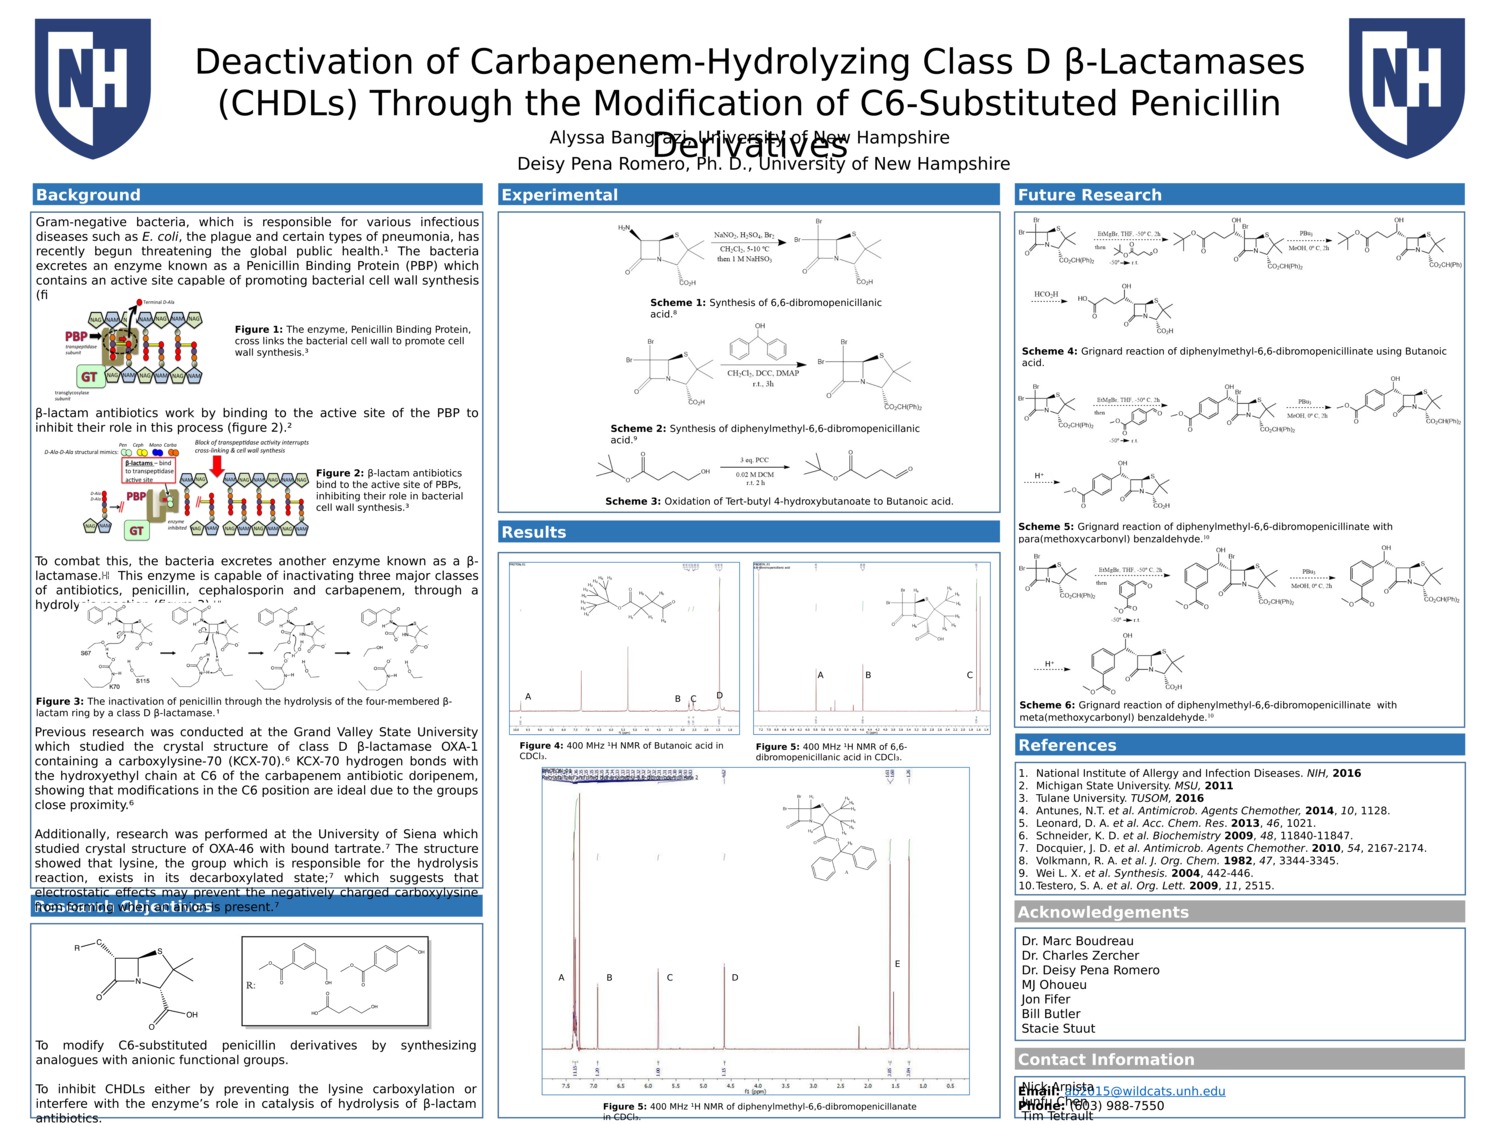 Deactivation Of Carbapenem-Hydrolyzing Class D Β-Lactamases (Chdls) Through The Modification Of C6-Substituted Penicillin Derivatives by ab2015